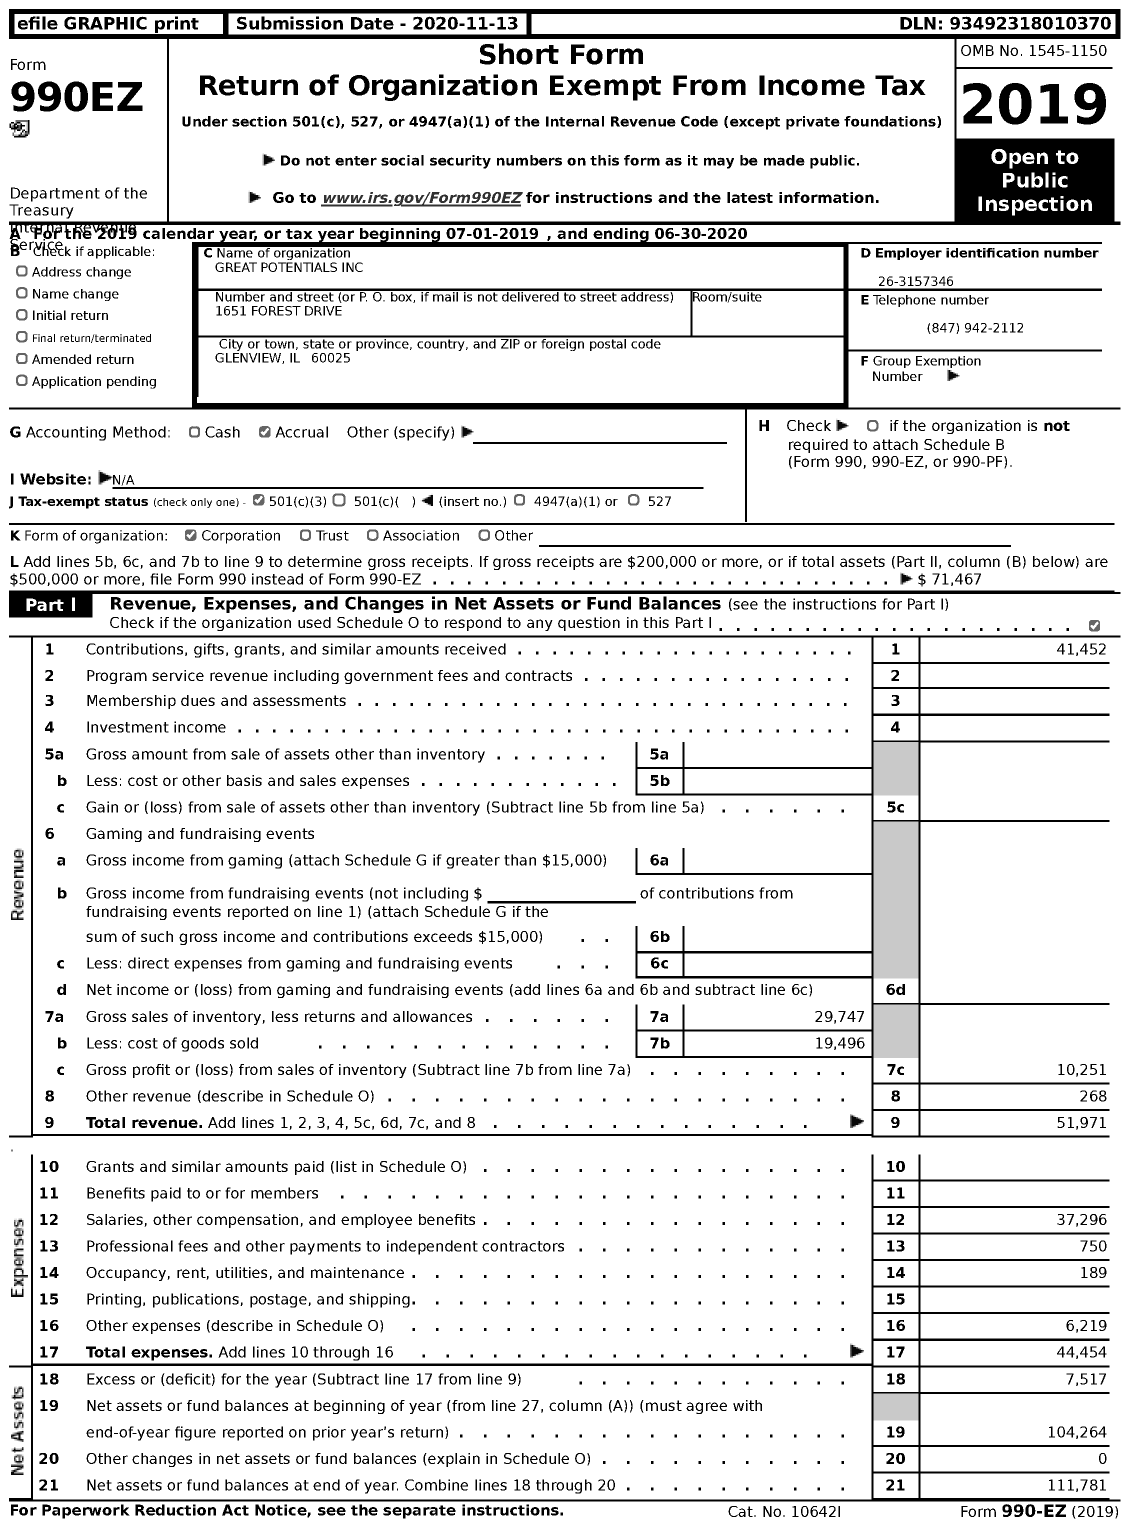 Image of first page of 2019 Form 990EZ for Great Potentials